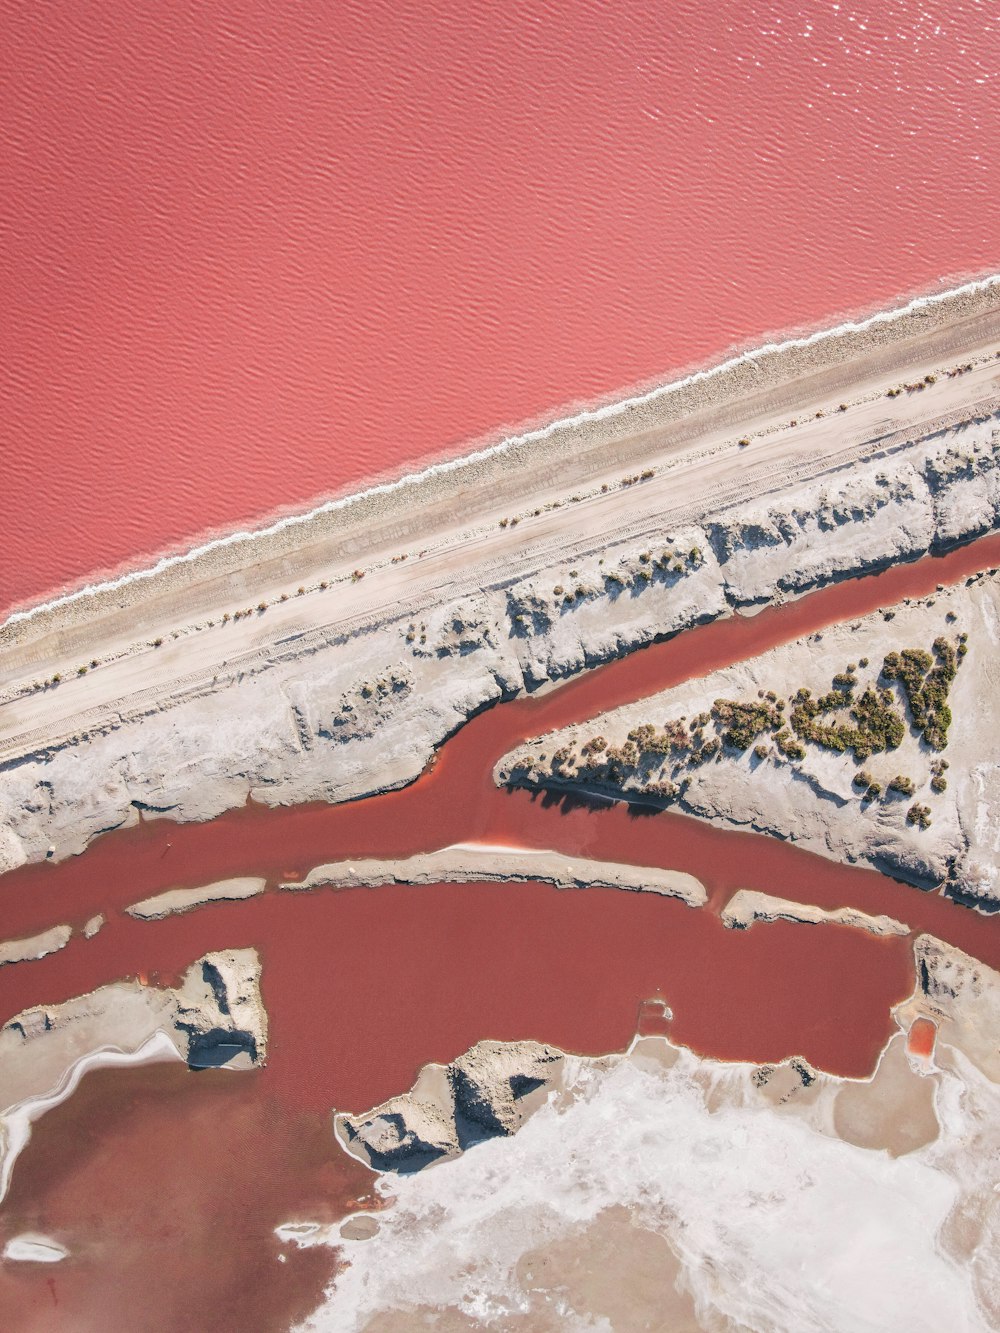 an aerial view of a body of water with red water